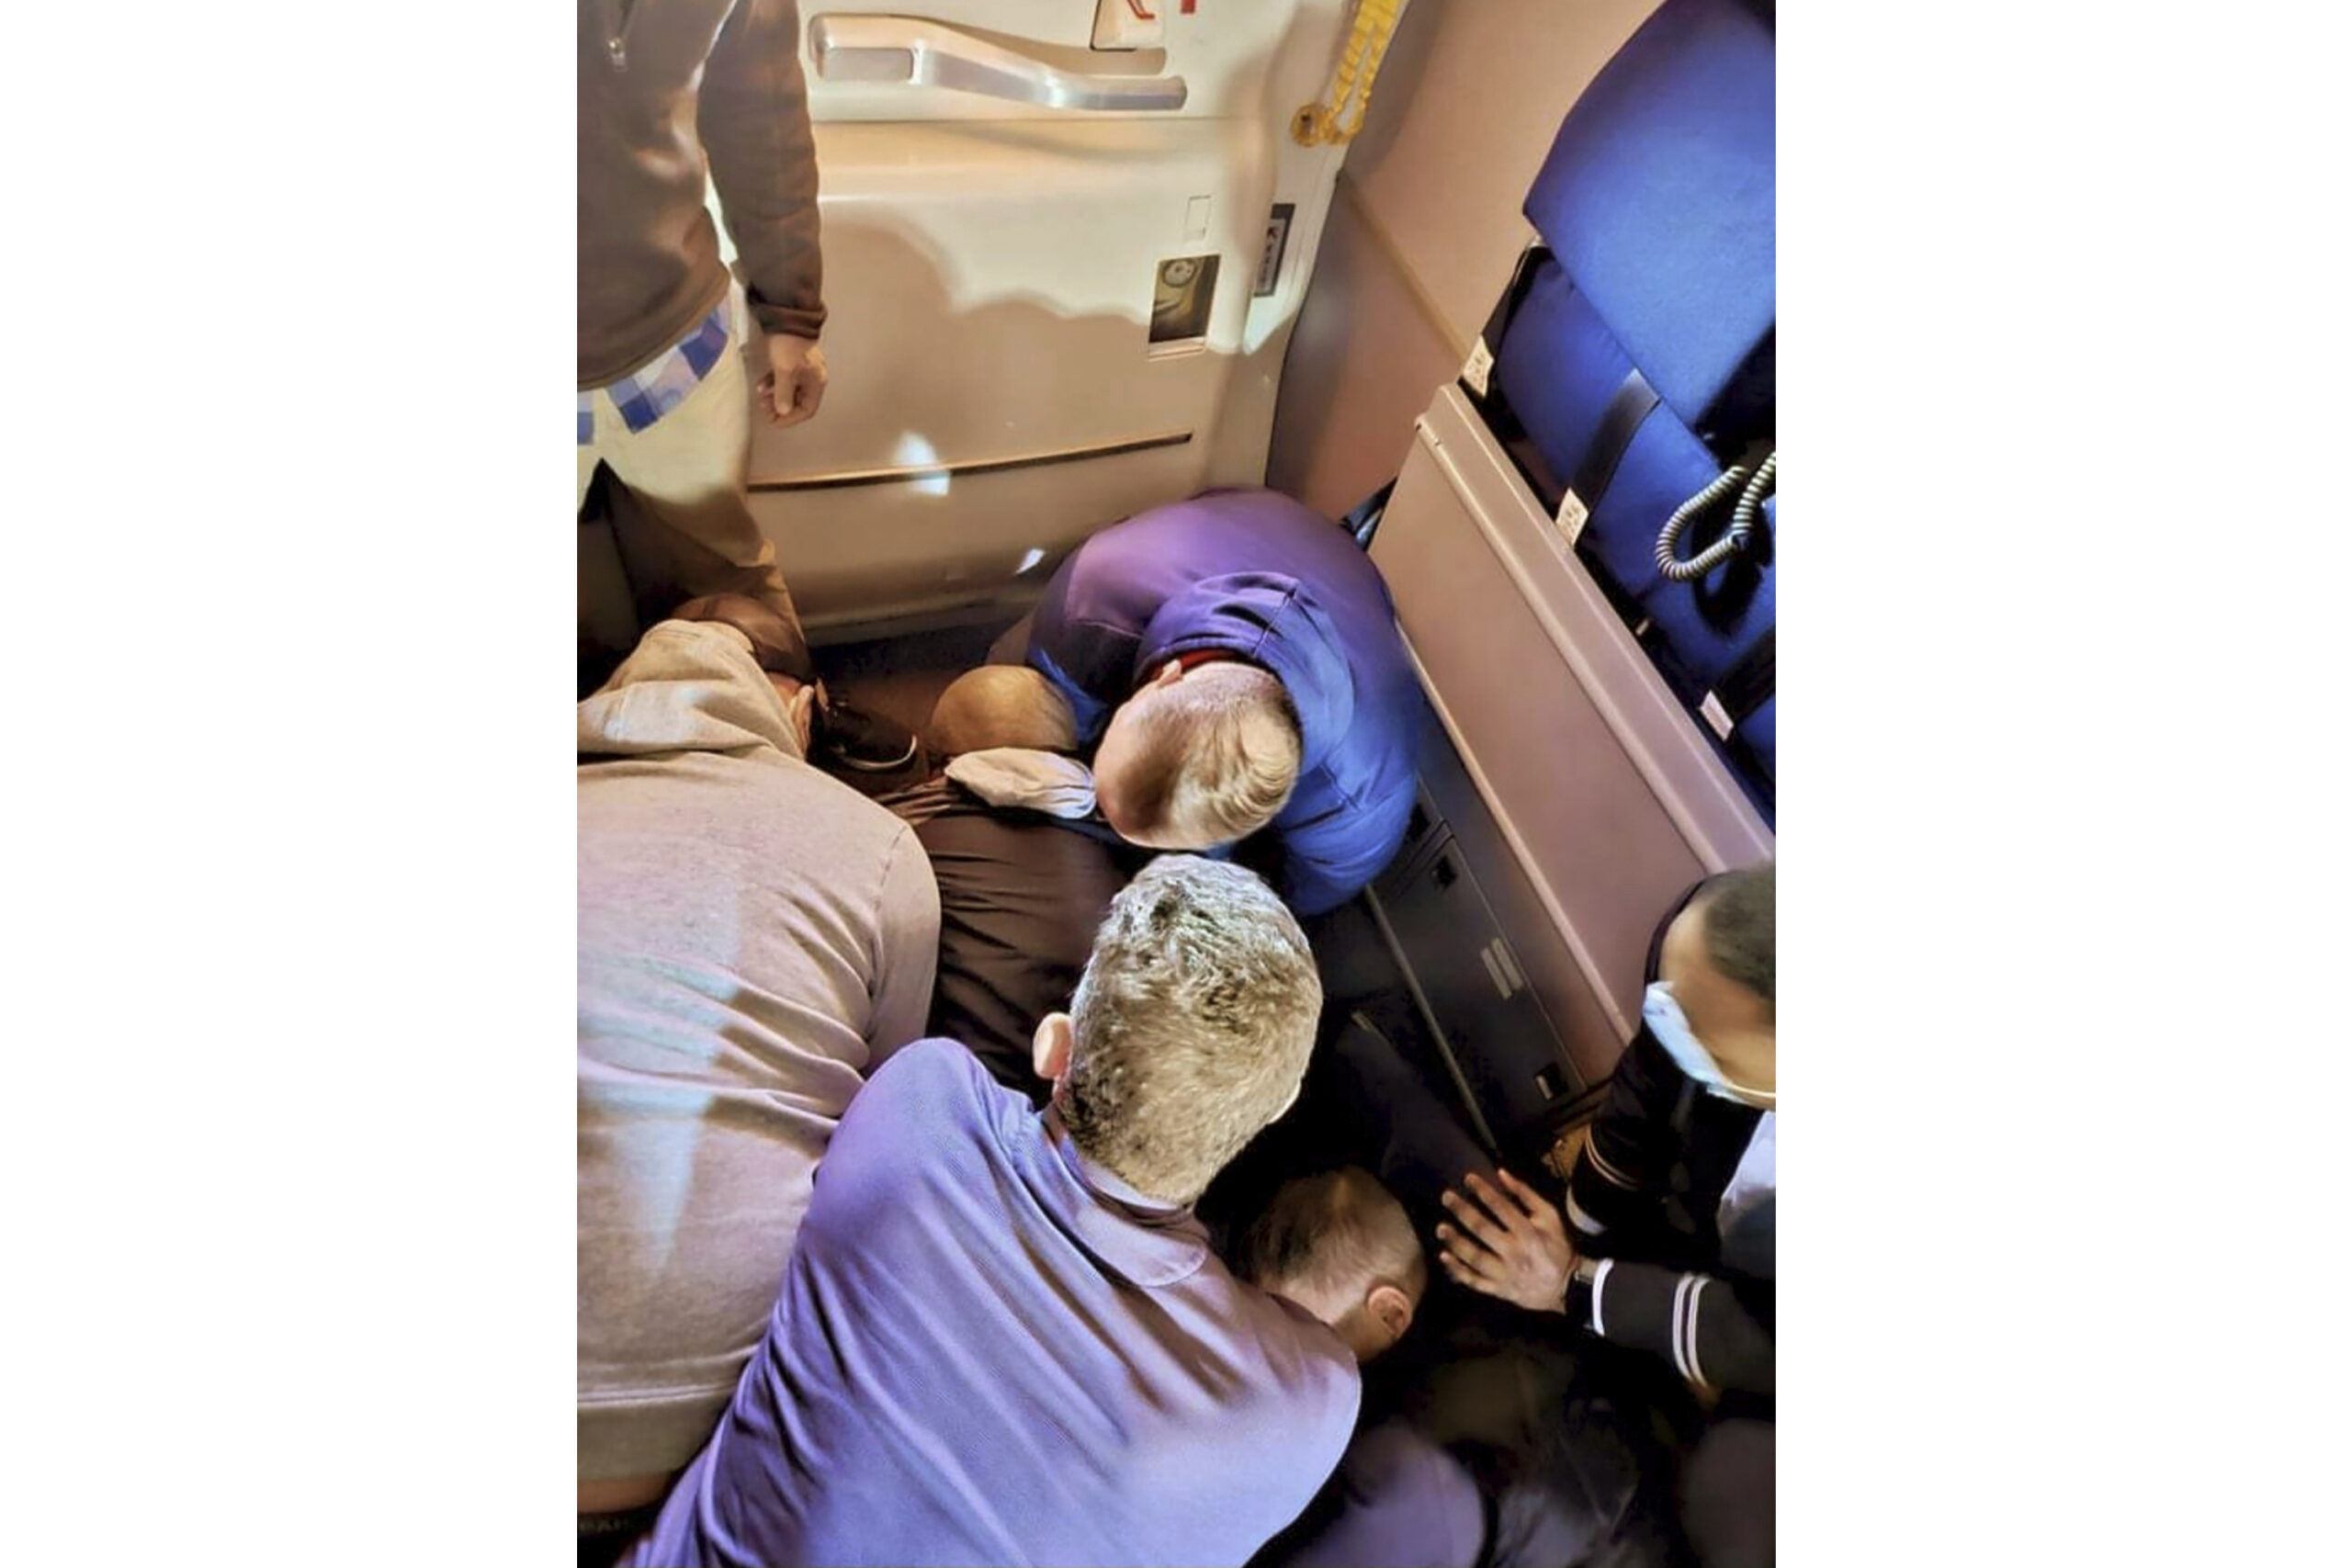 FILE — This image provided by Simik Ghookasian shows passengers and crew members restraining a ma...